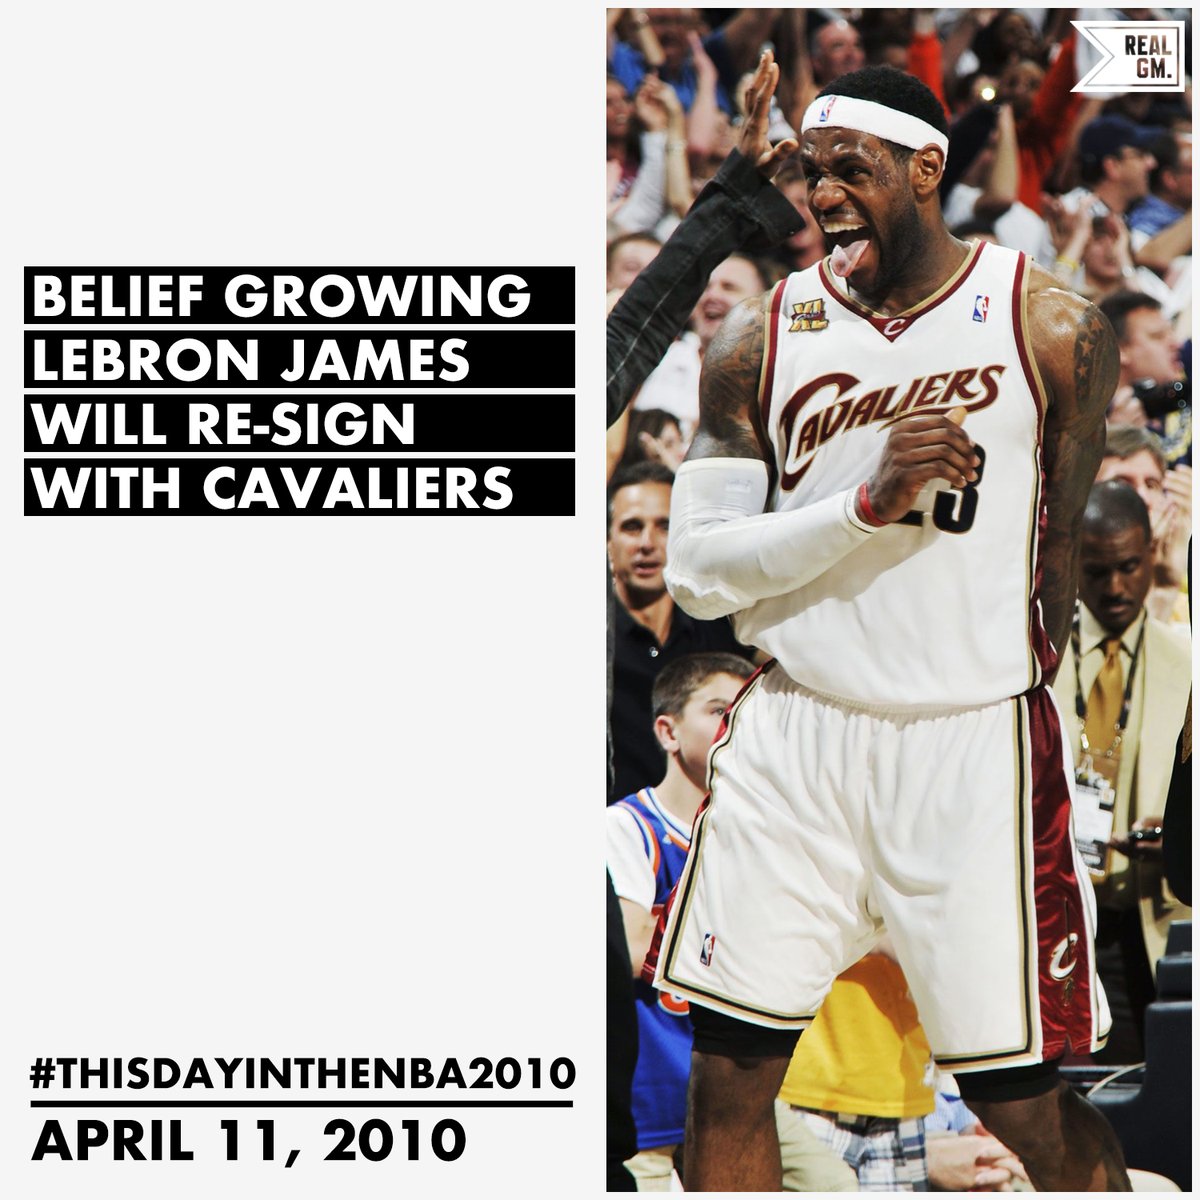  #ThisDayInTheNBA2010April 11, 2010Belief Growing LeBron James Will Re-Sign With Cavaliers https://basketball.realgm.com/wiretap/203227/Belief-Growing-LeBron-James-Will-Re-Sign-With-Cavaliers